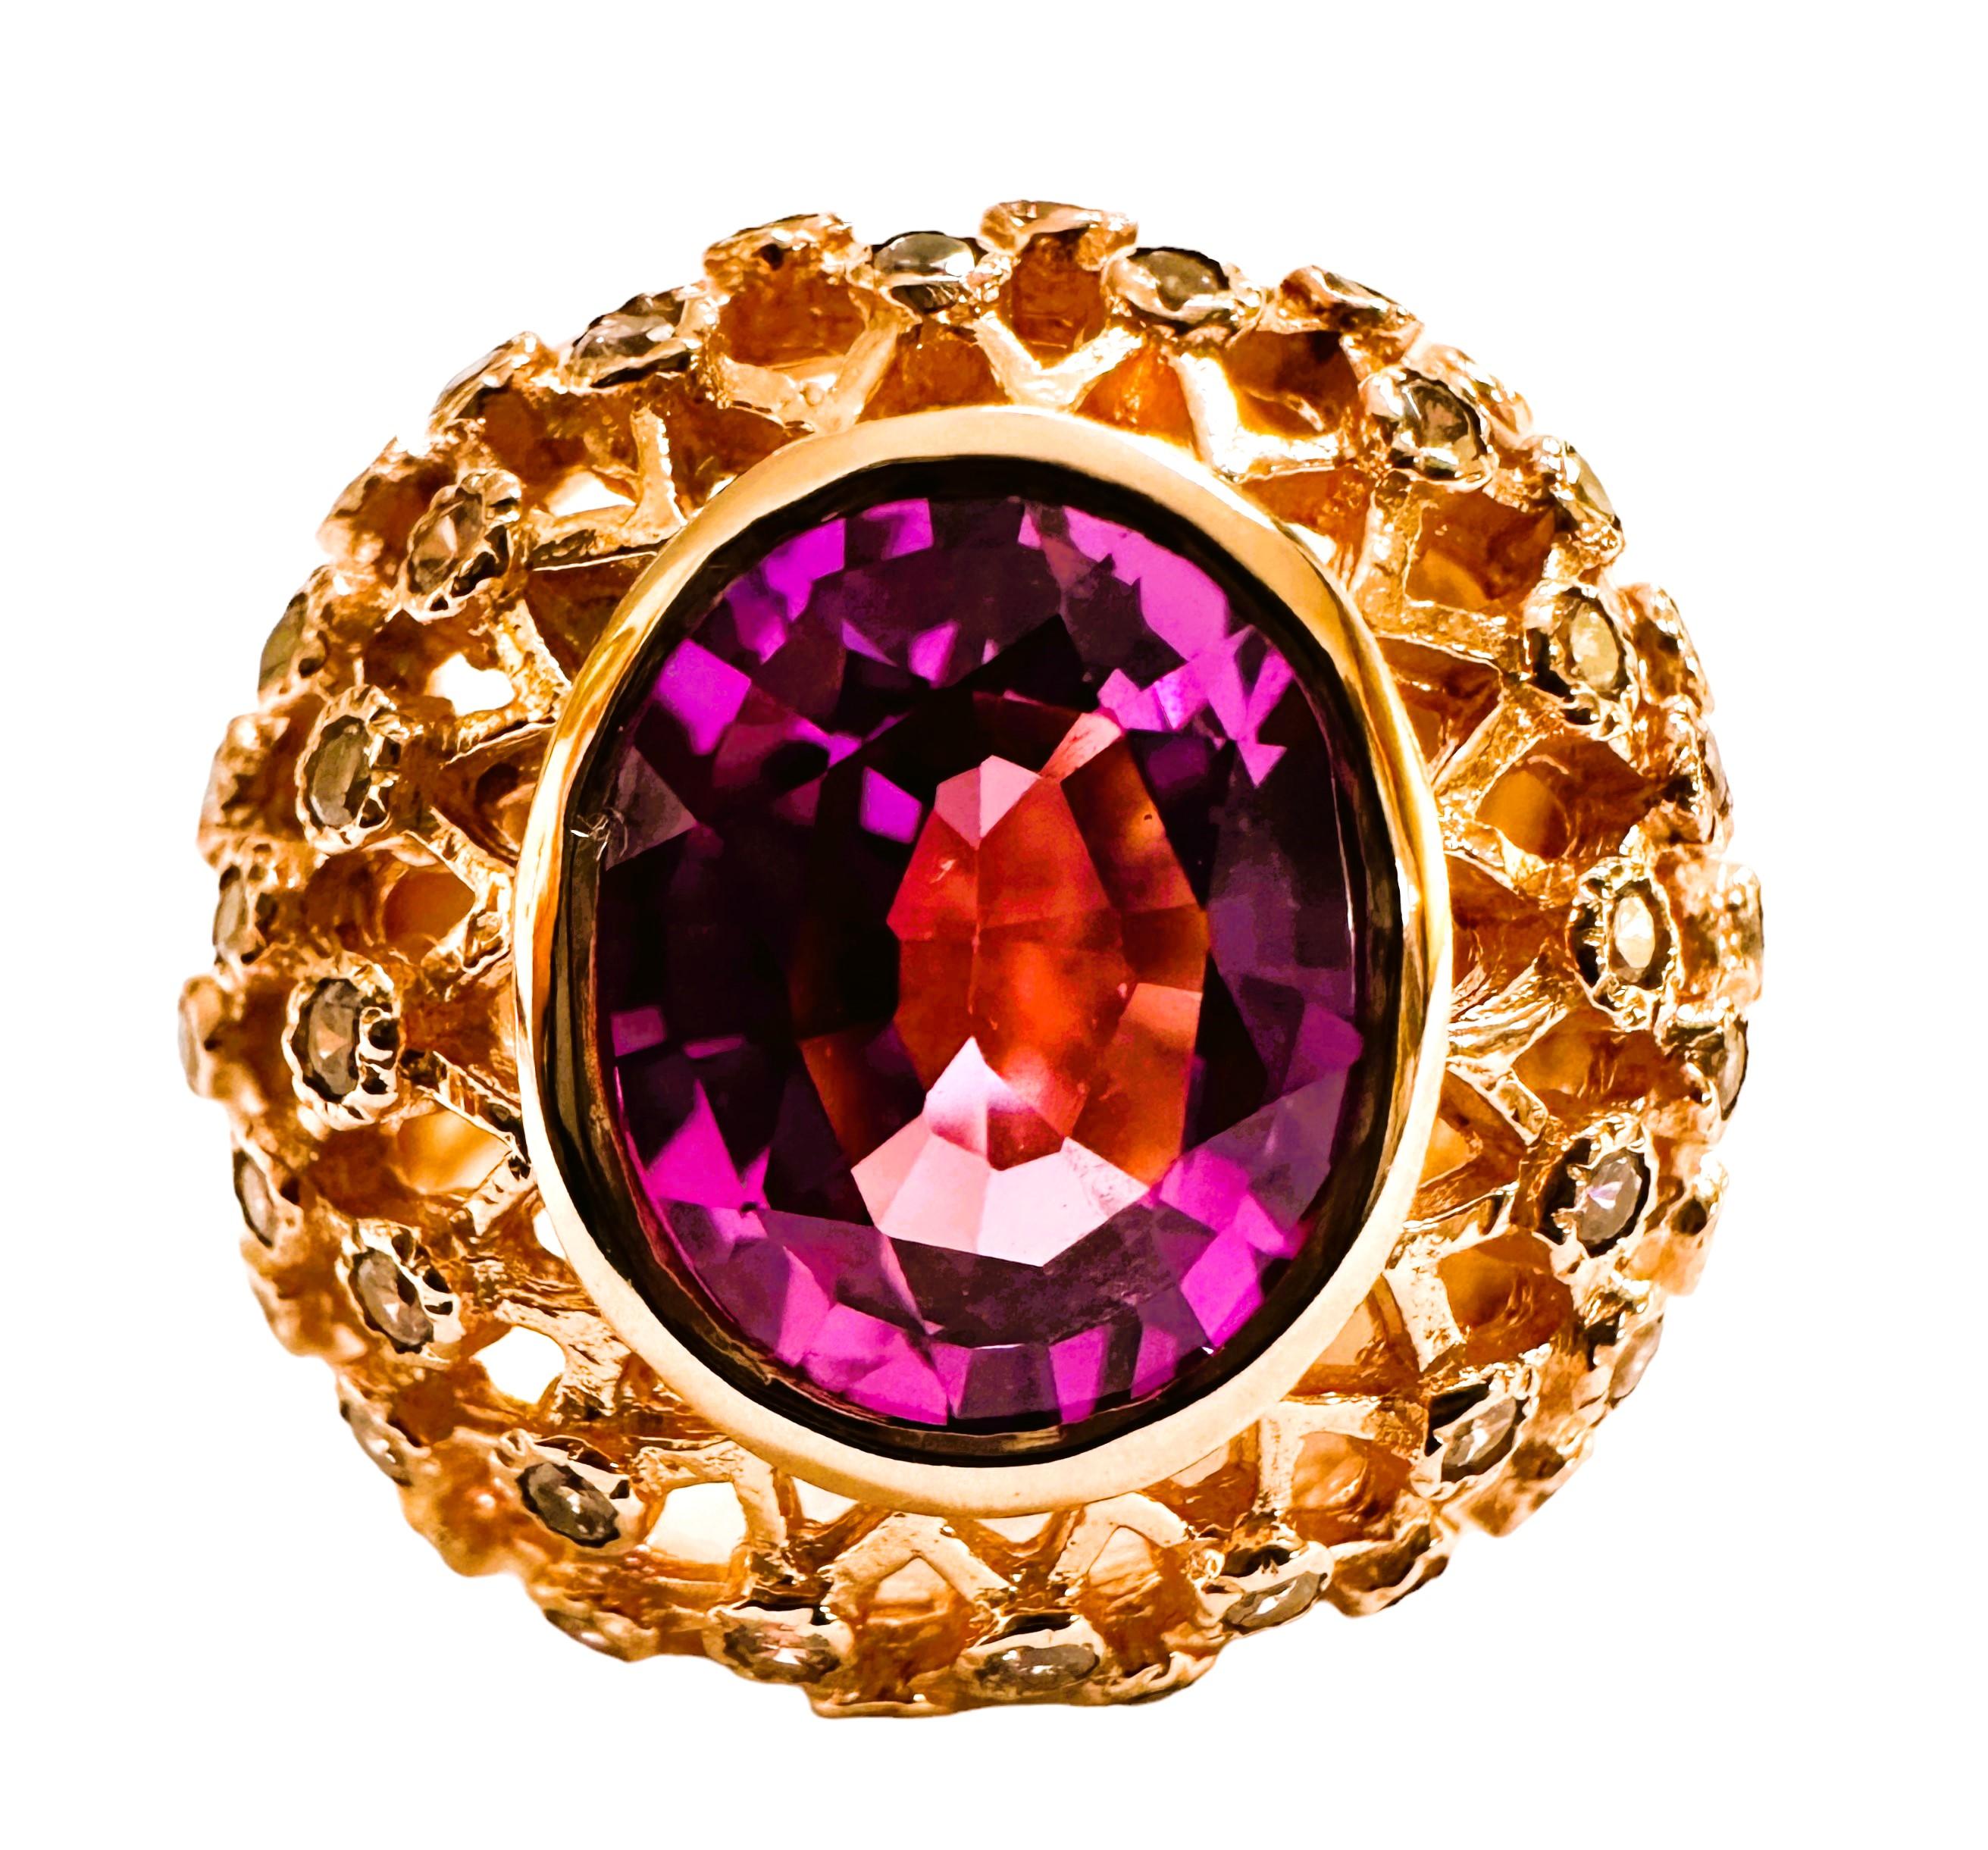 This is just a beautiful gemstone. This beautiful stone has pinks, blues and purples in it.  It's just spectacular.  The ring is a size 6.5.  It was mined in Africa and is just exquisite.   A very high quality stone. It is an oval cut stone and is